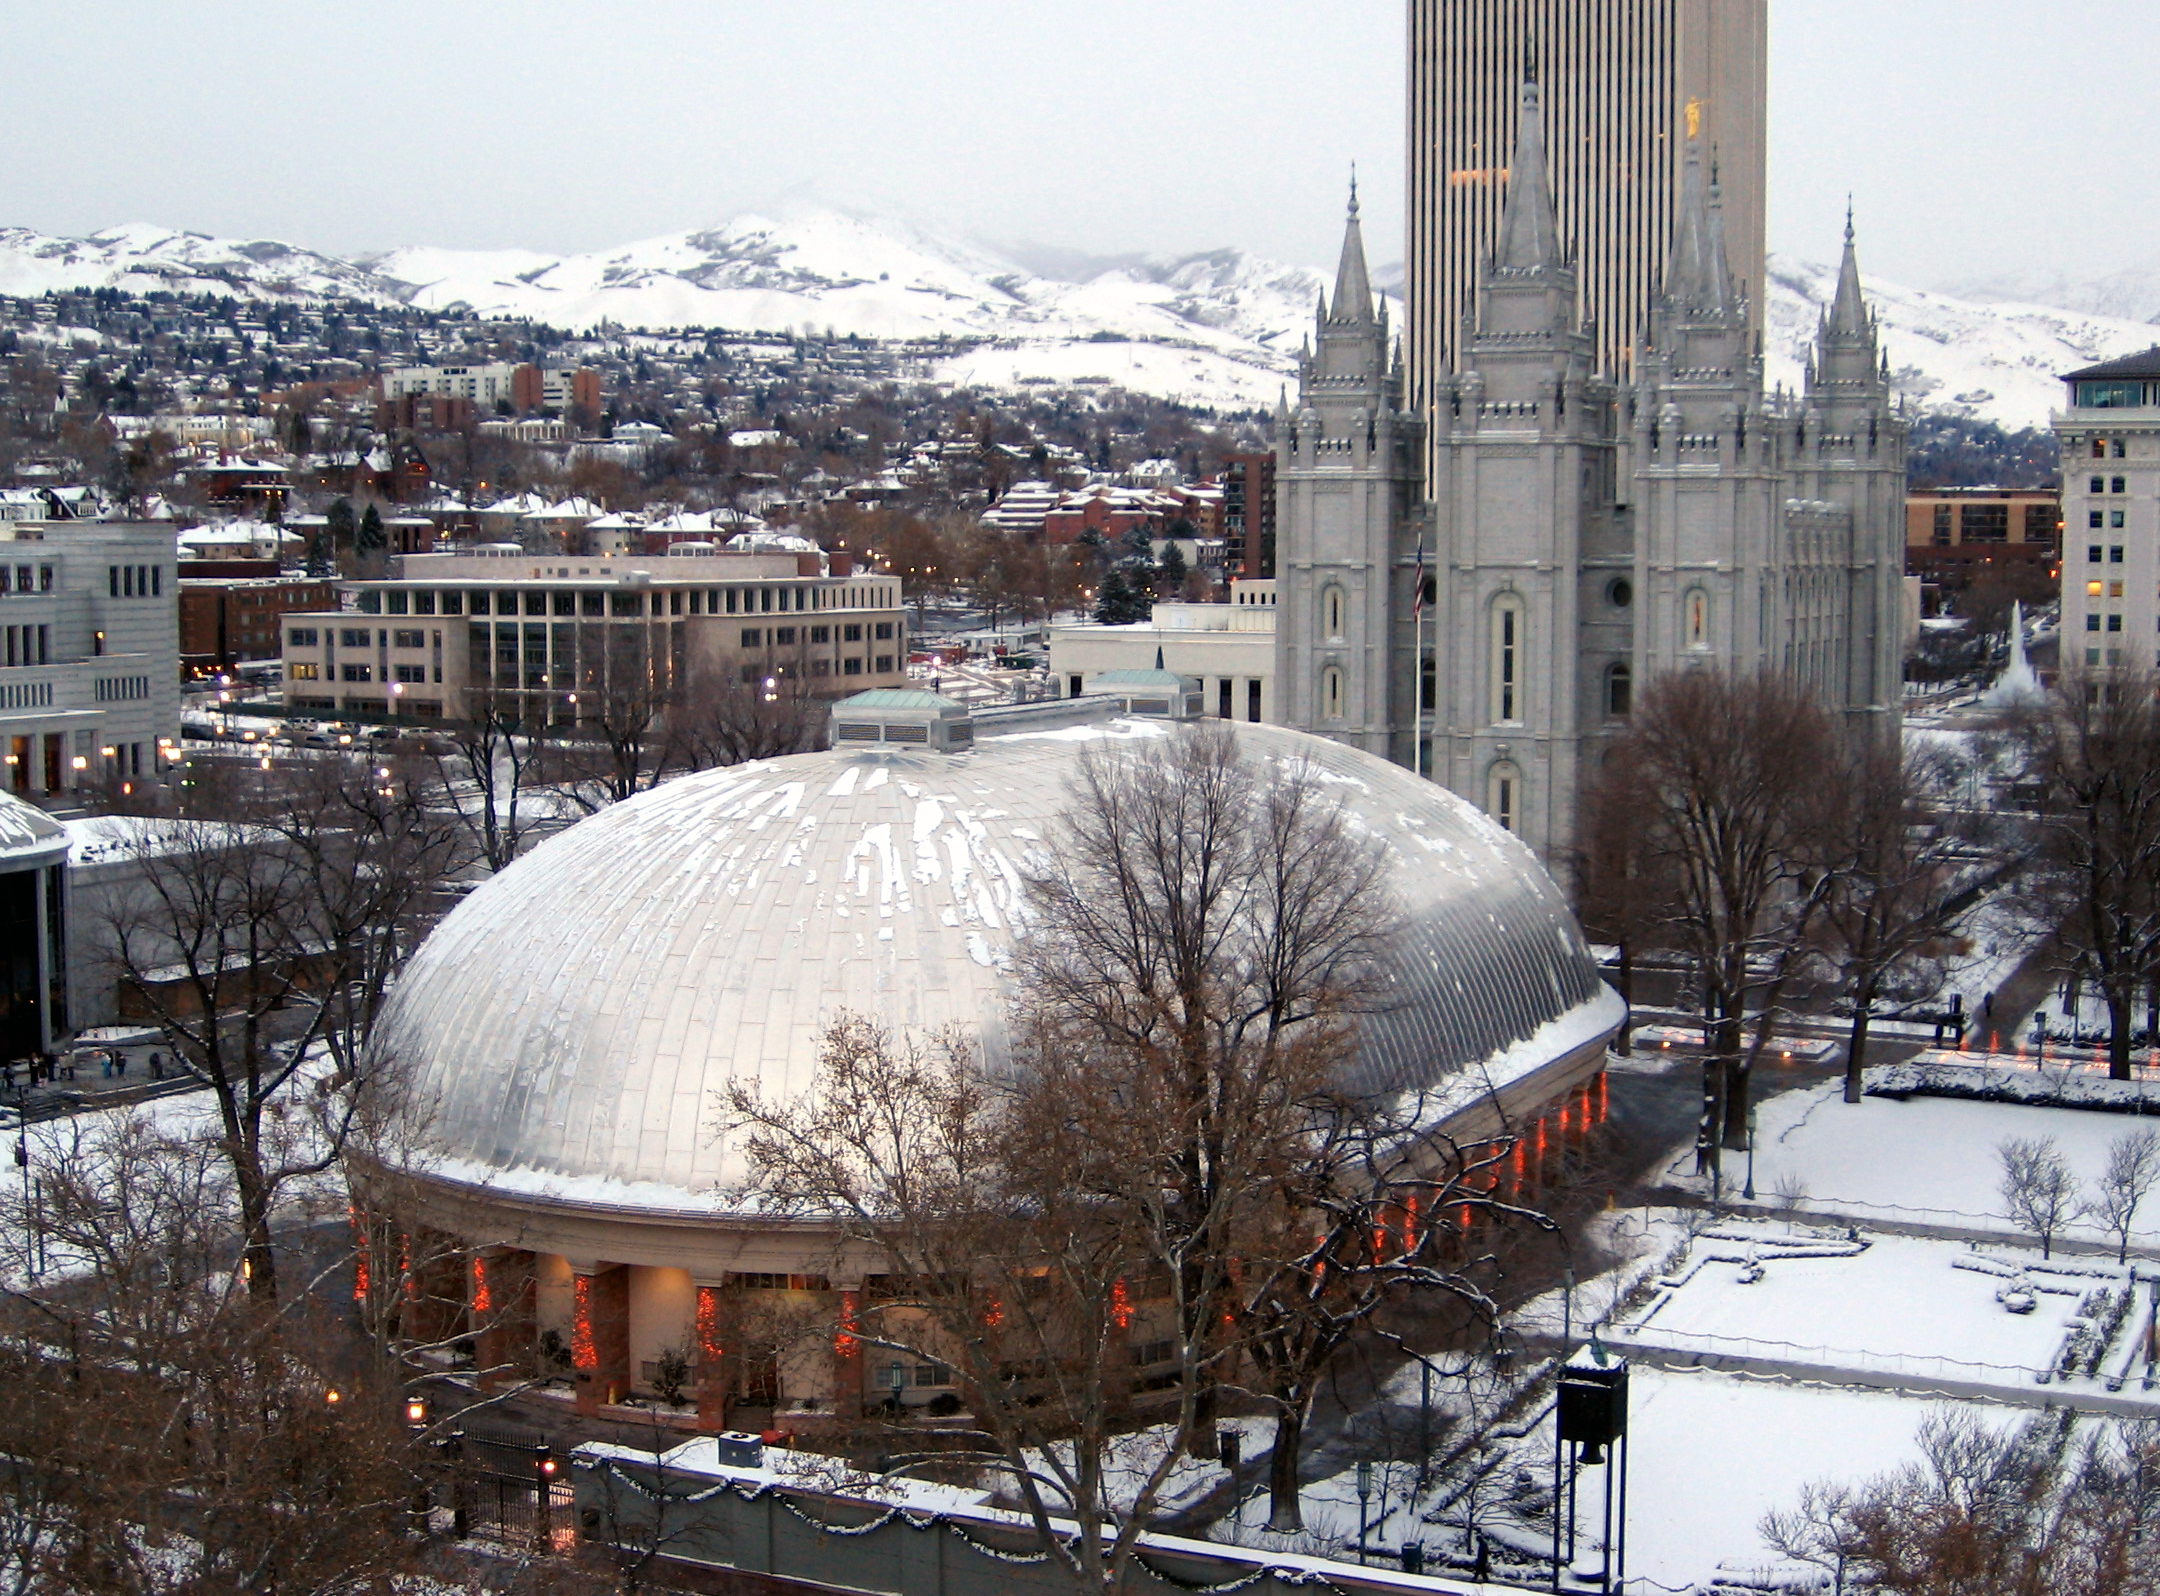 The Tabernacle in December 2008